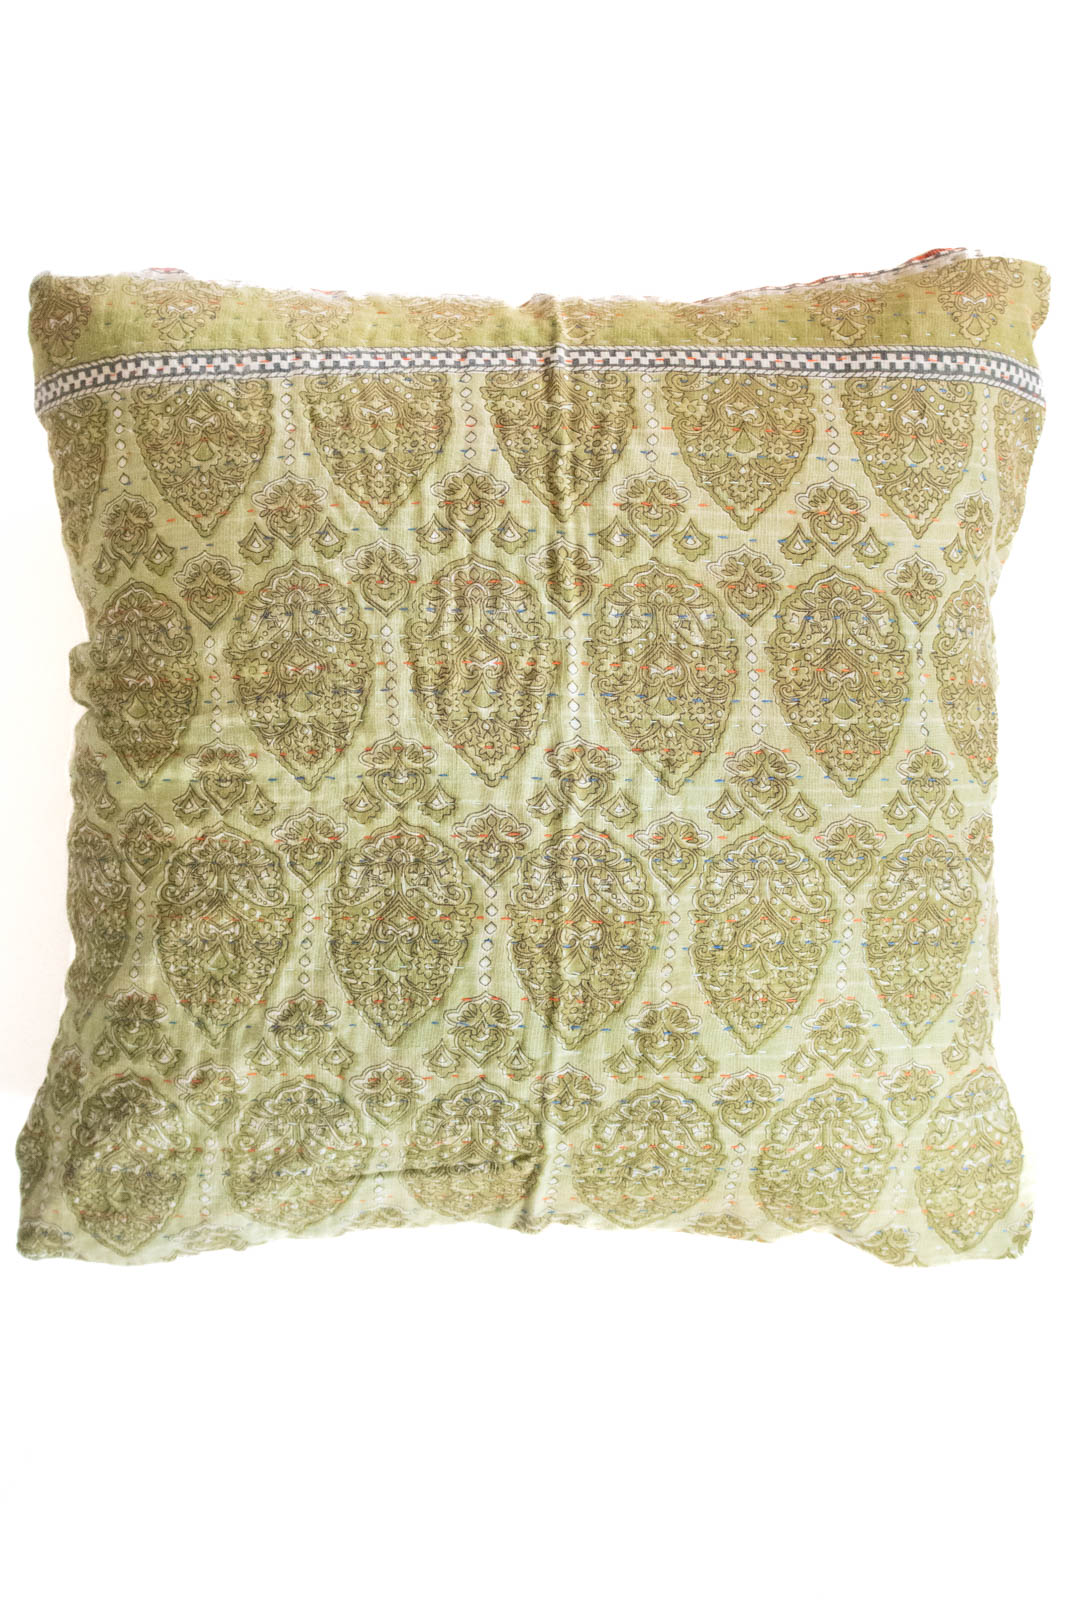 Fearless no. 1 Kantha Pillow Cover